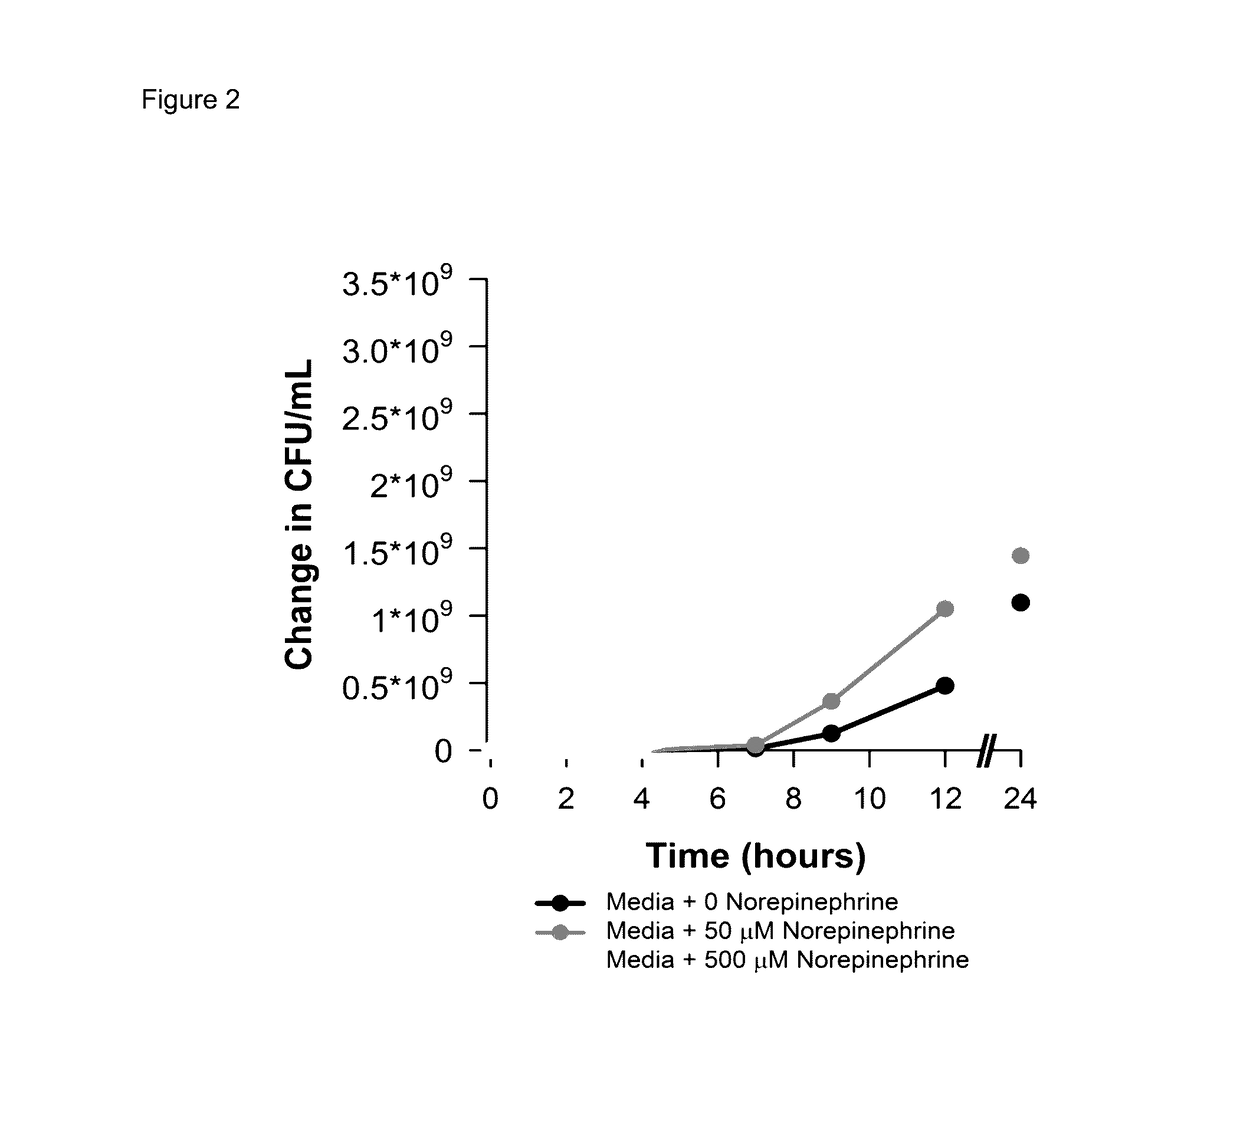 Method for shortening Anti-infective therapy duration in subjects with infection